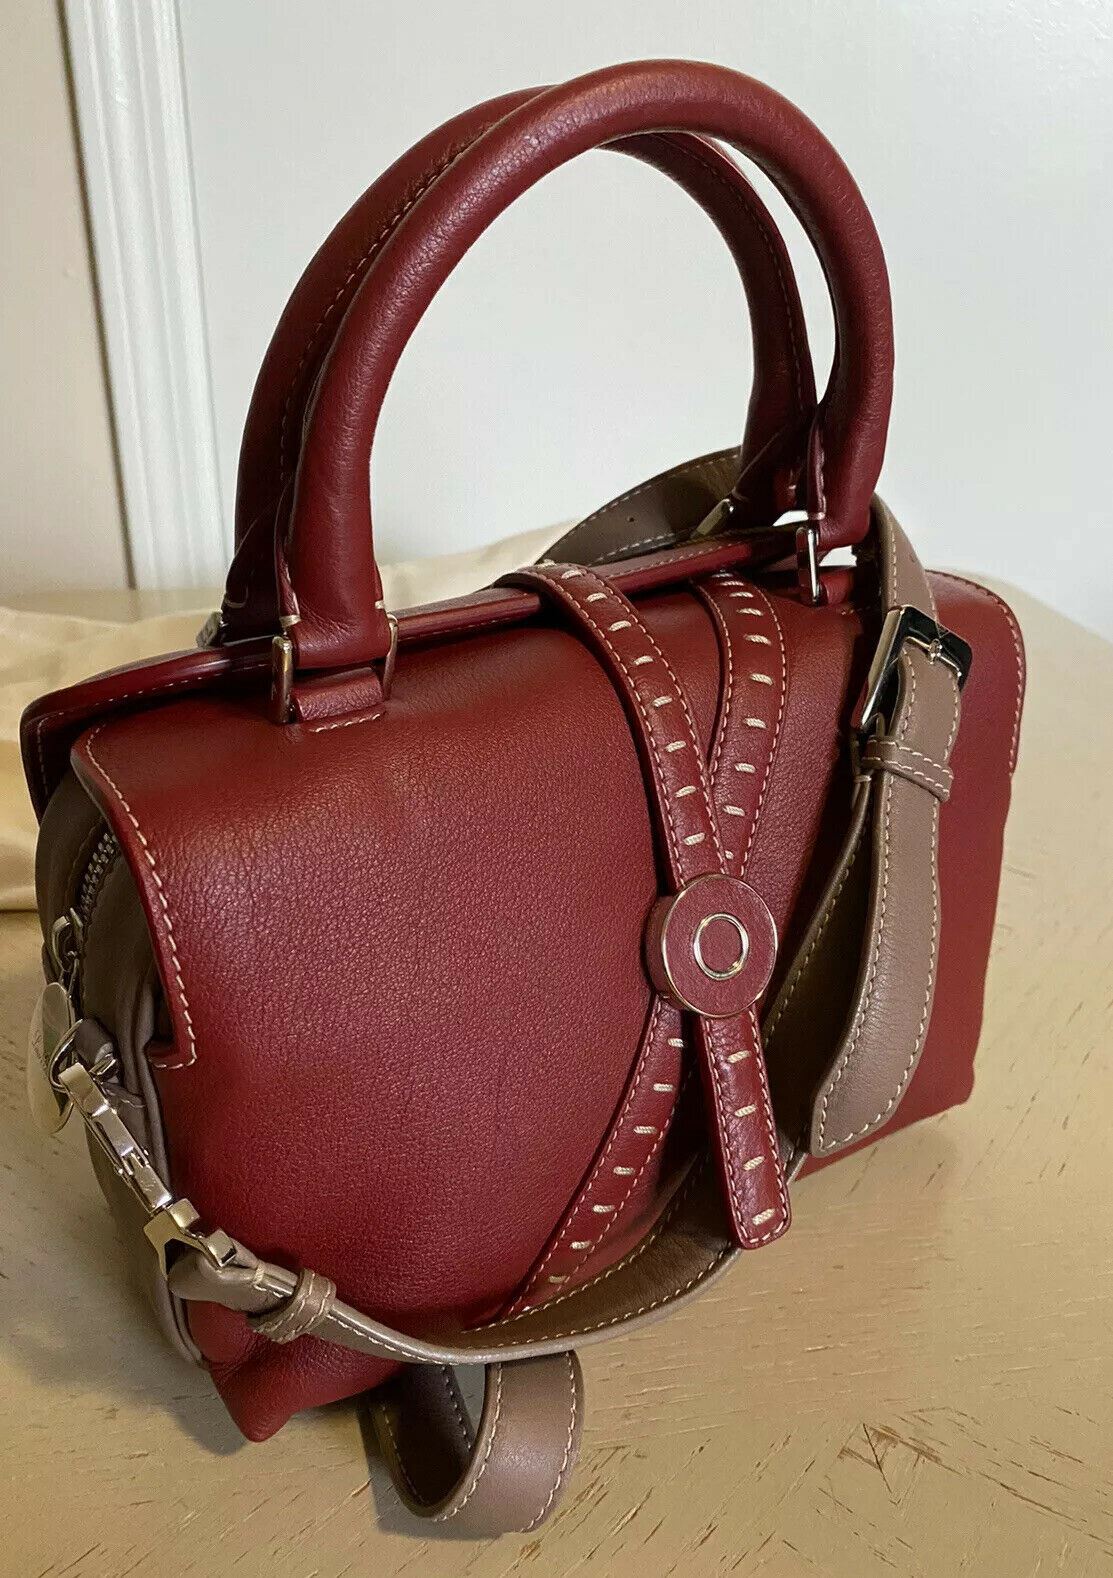 Loro Piana Globe Bag Red Grained Leather Large Shoulder Bag